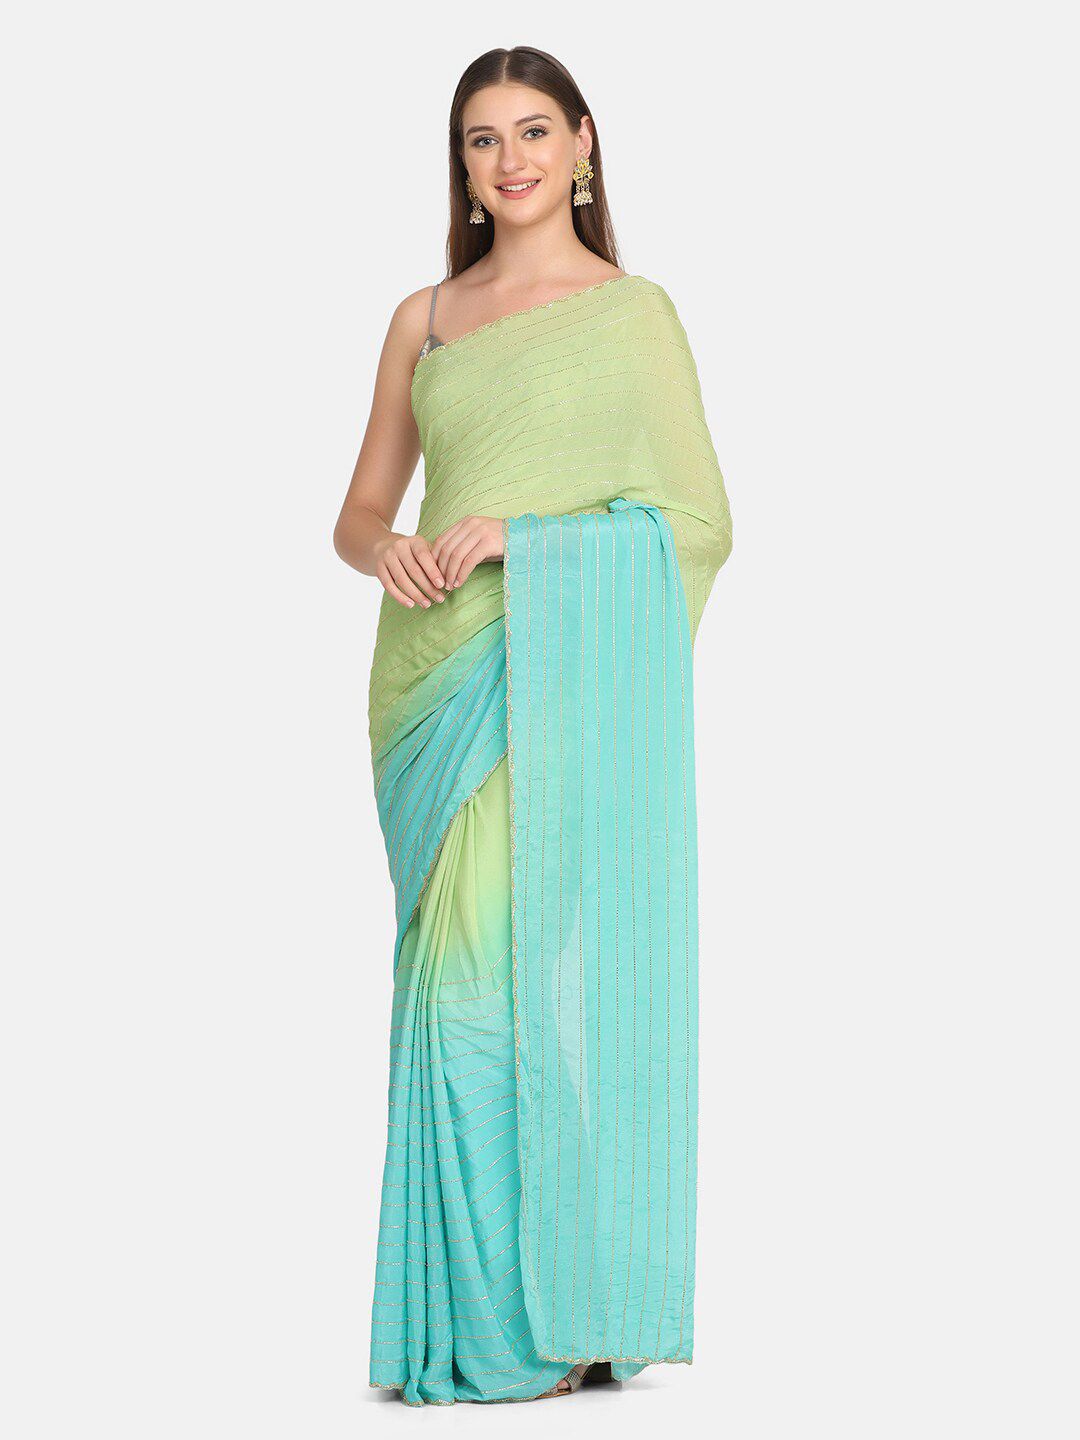 BOMBAY SELECTIONS Green & Blue Striped Pure Silk Saree Price in India